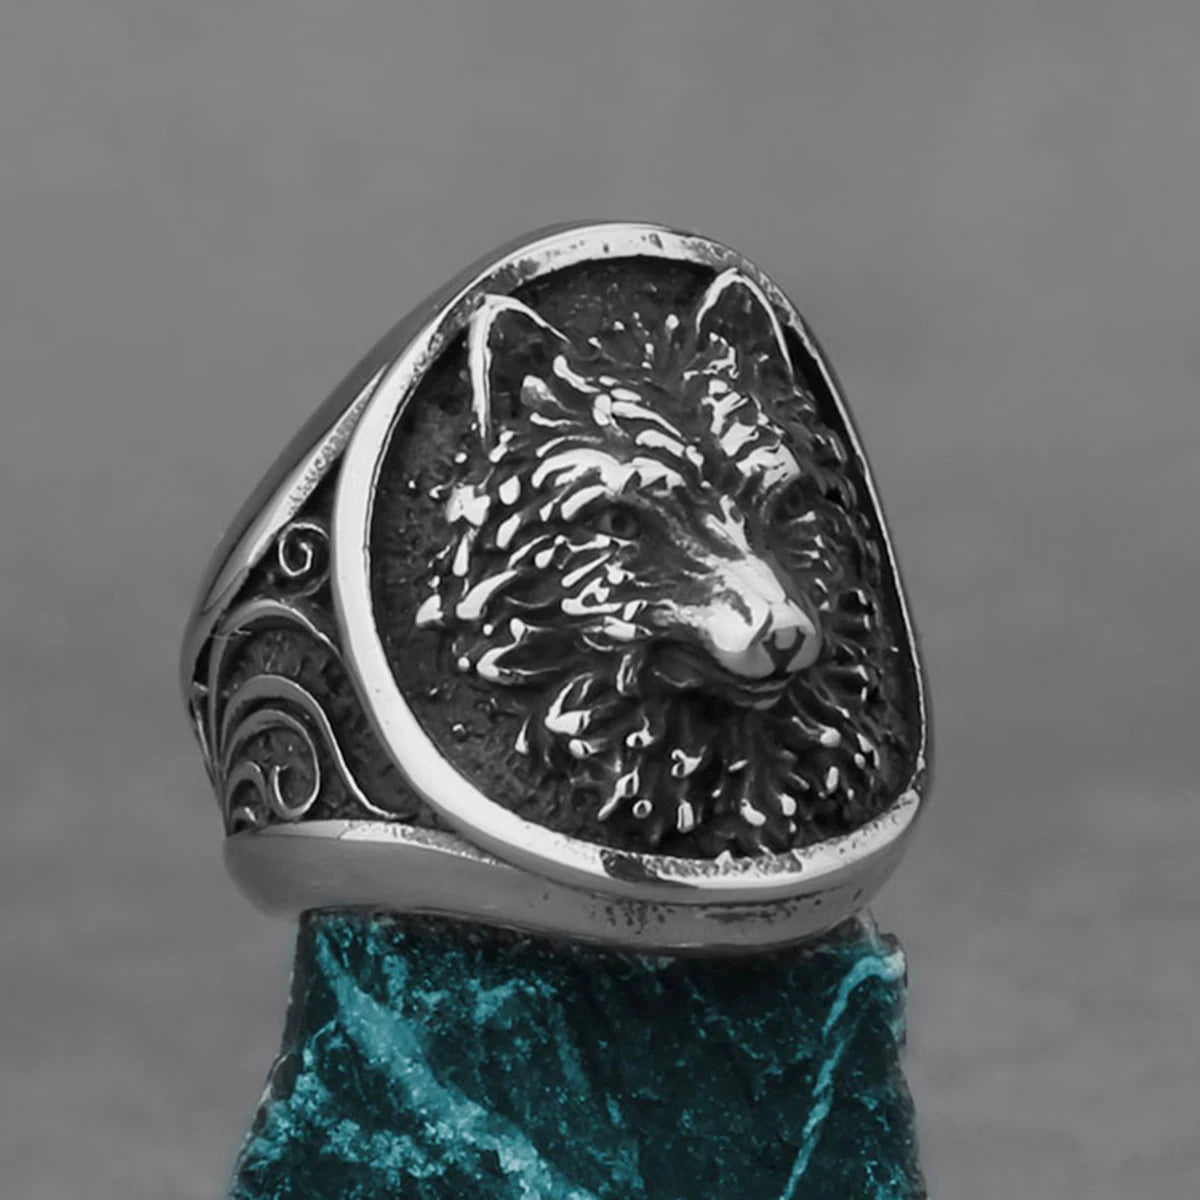 Nordic Viking Stainless Steel Ring - Anchor Compass Tree of Life Rune Amulet Wolf Finger Jewelry VK-9 Men's Rings